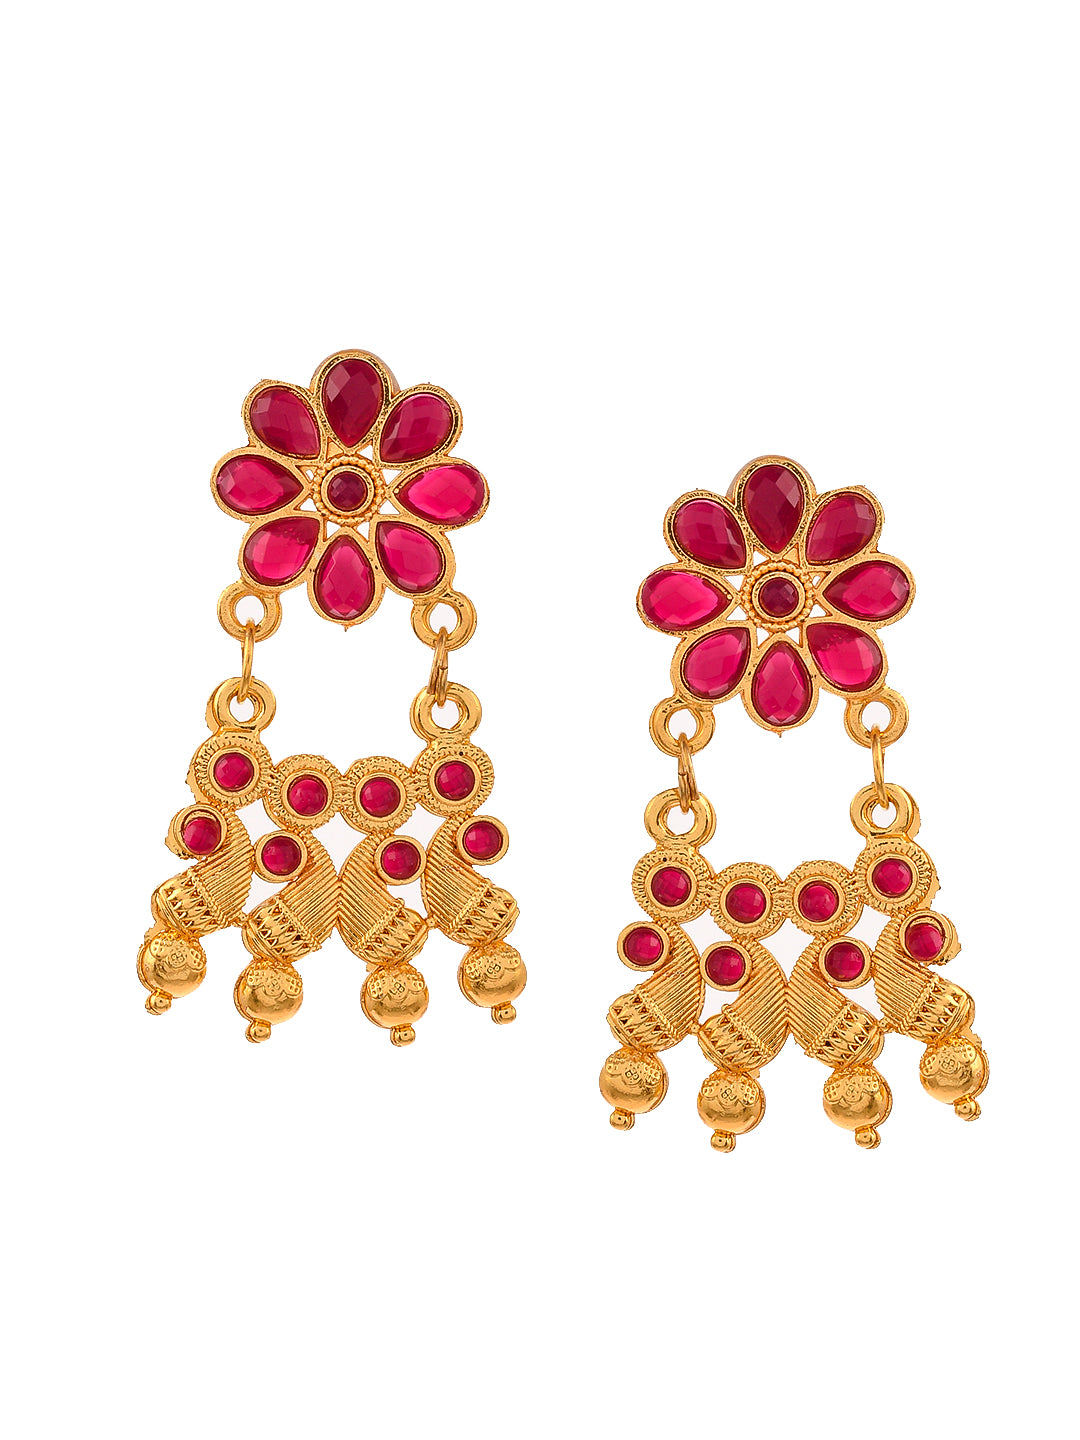 Gold Plated Handcrafted Floral Jewellery Set